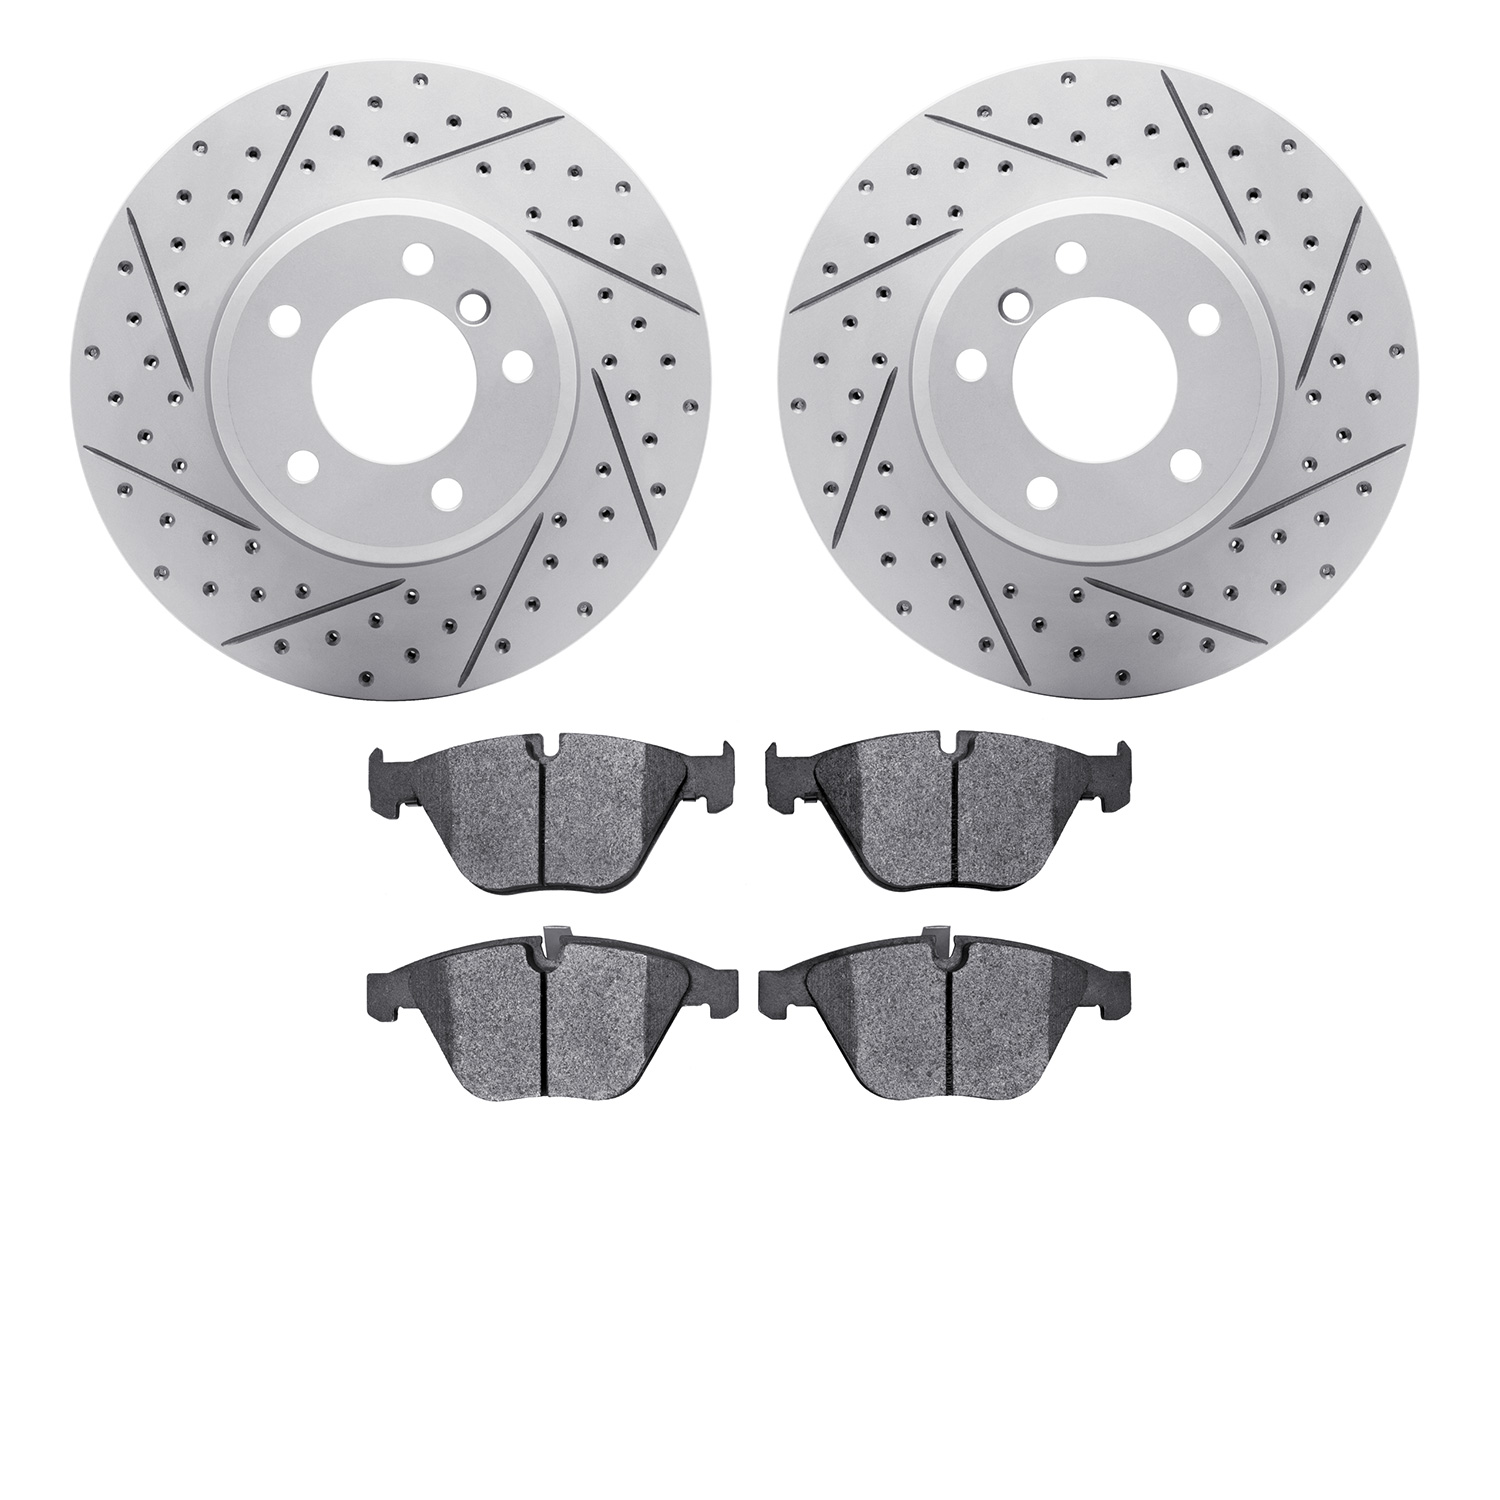 2502-31043 Geoperformance Drilled/Slotted Rotors w/5000 Advanced Brake Pads Kit, 2004-2010 BMW, Position: Front